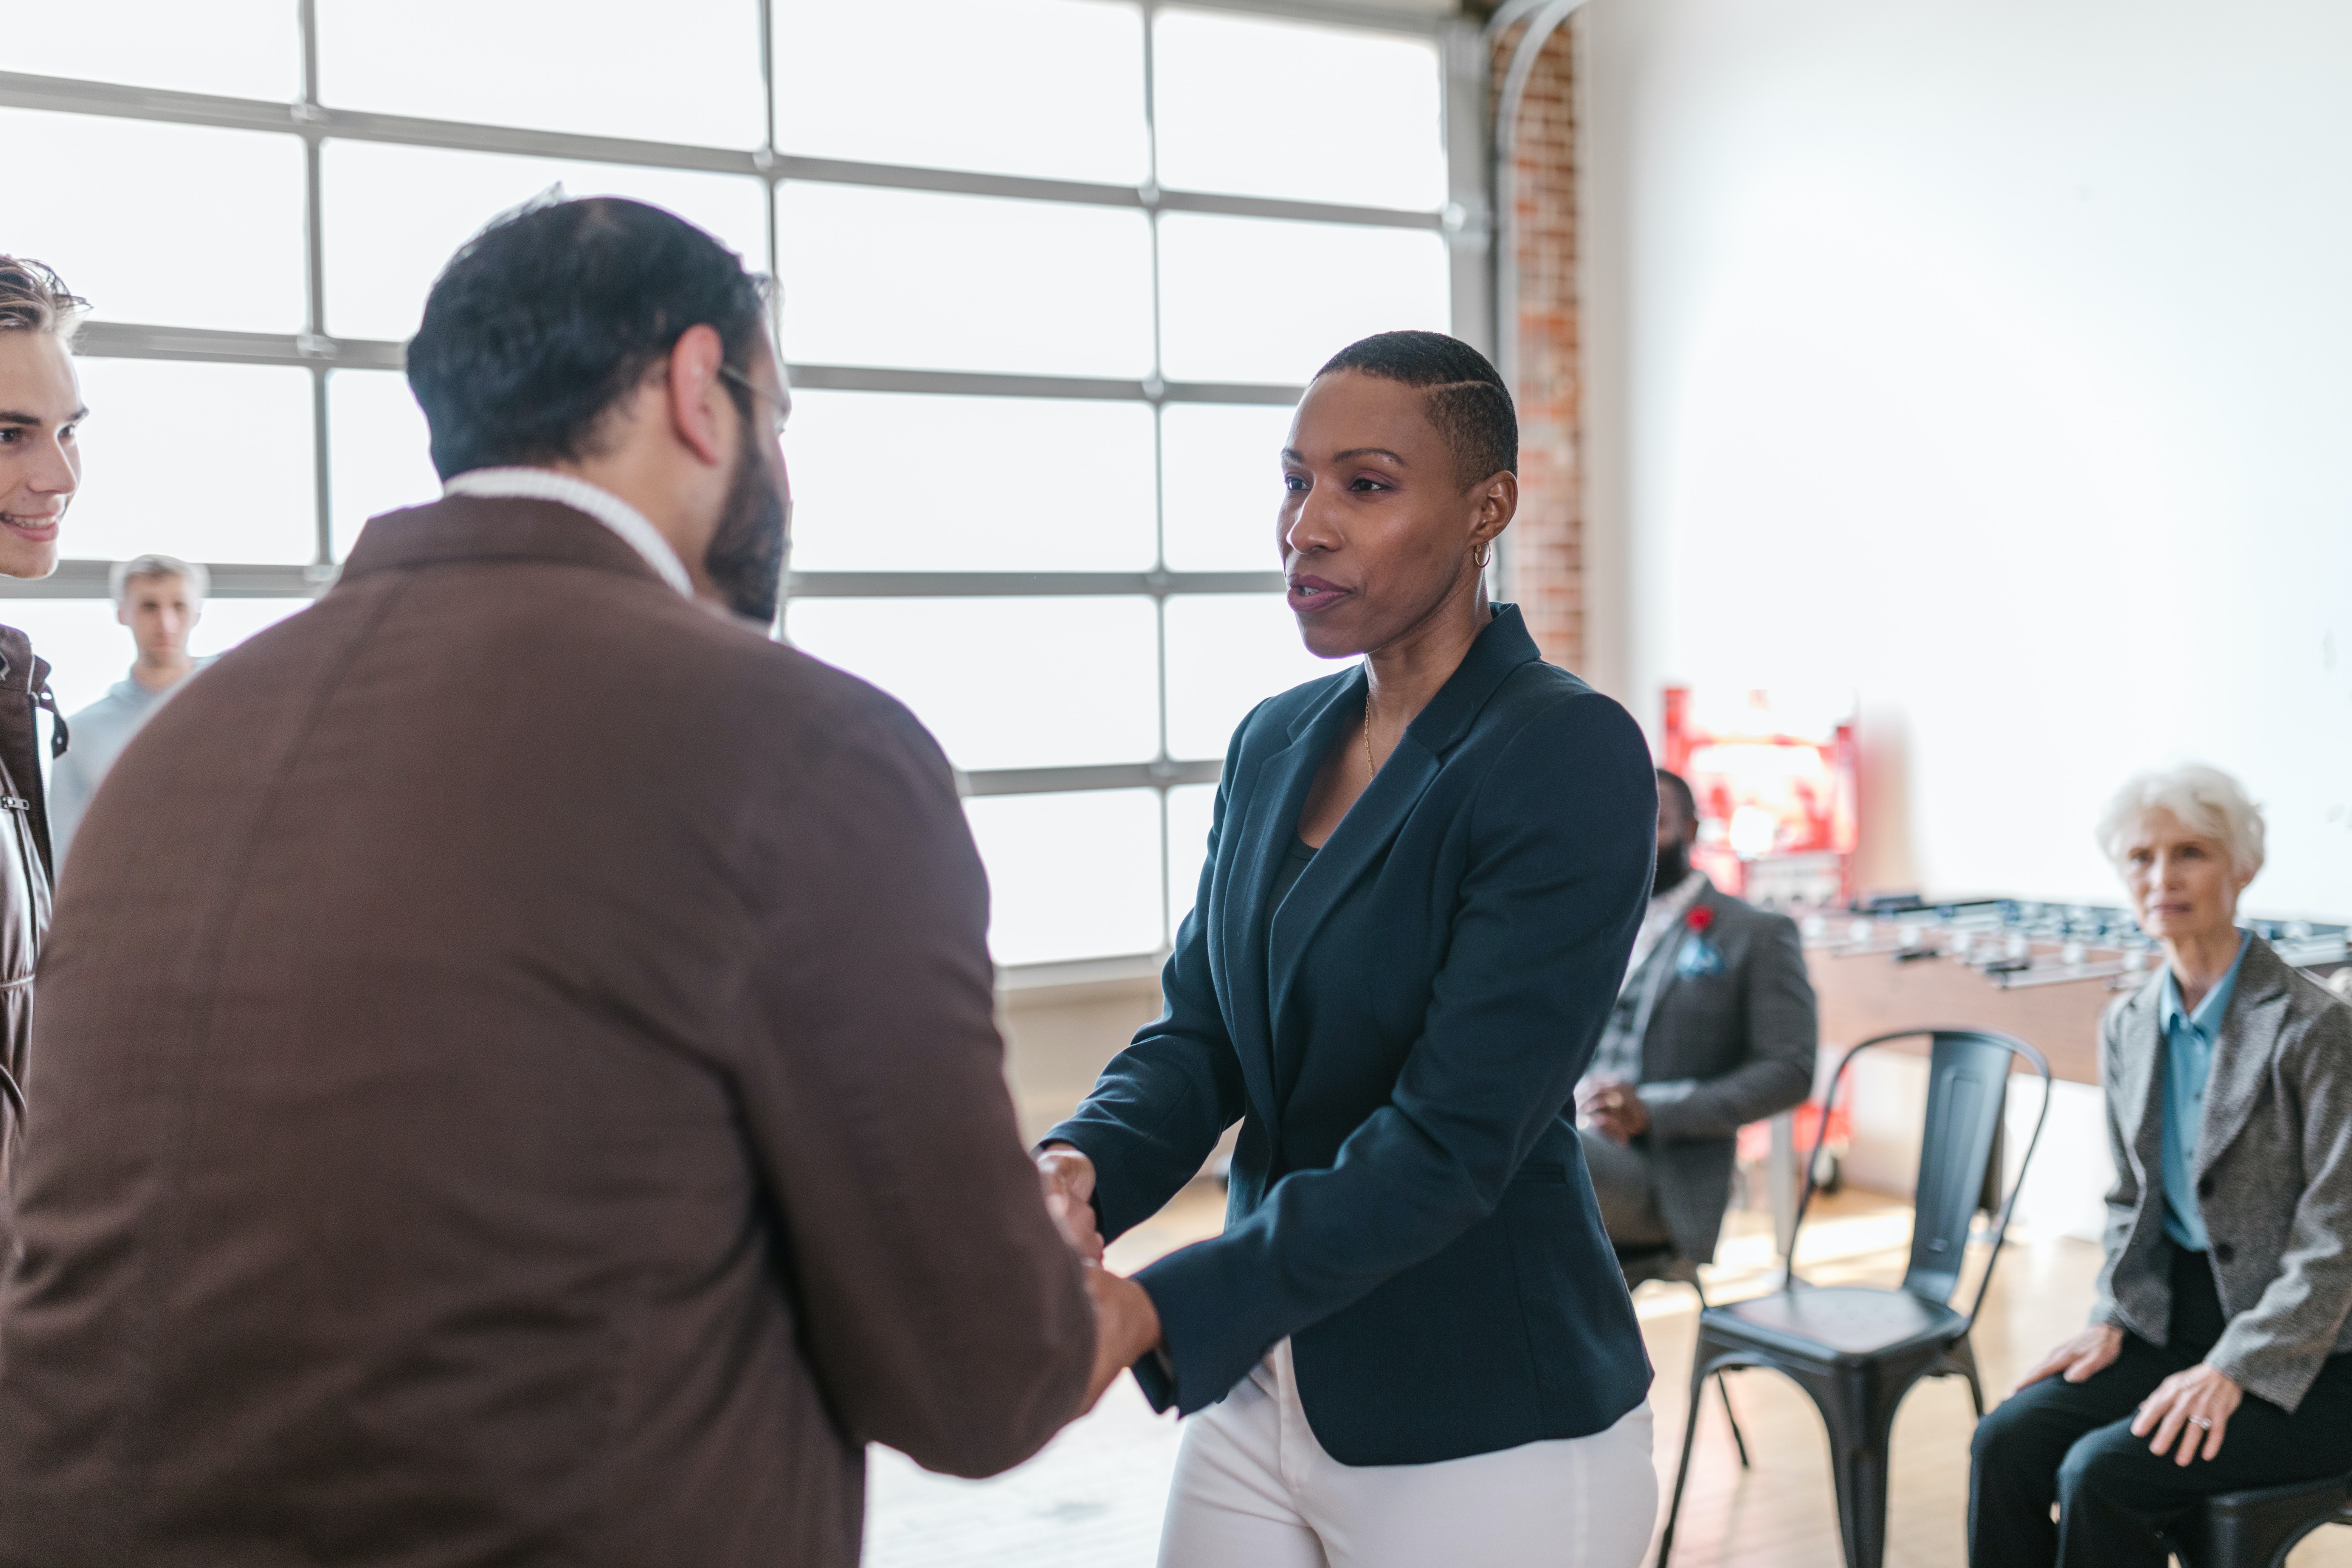 Cultivating Connections: Networking for Serious Entrepreneurs